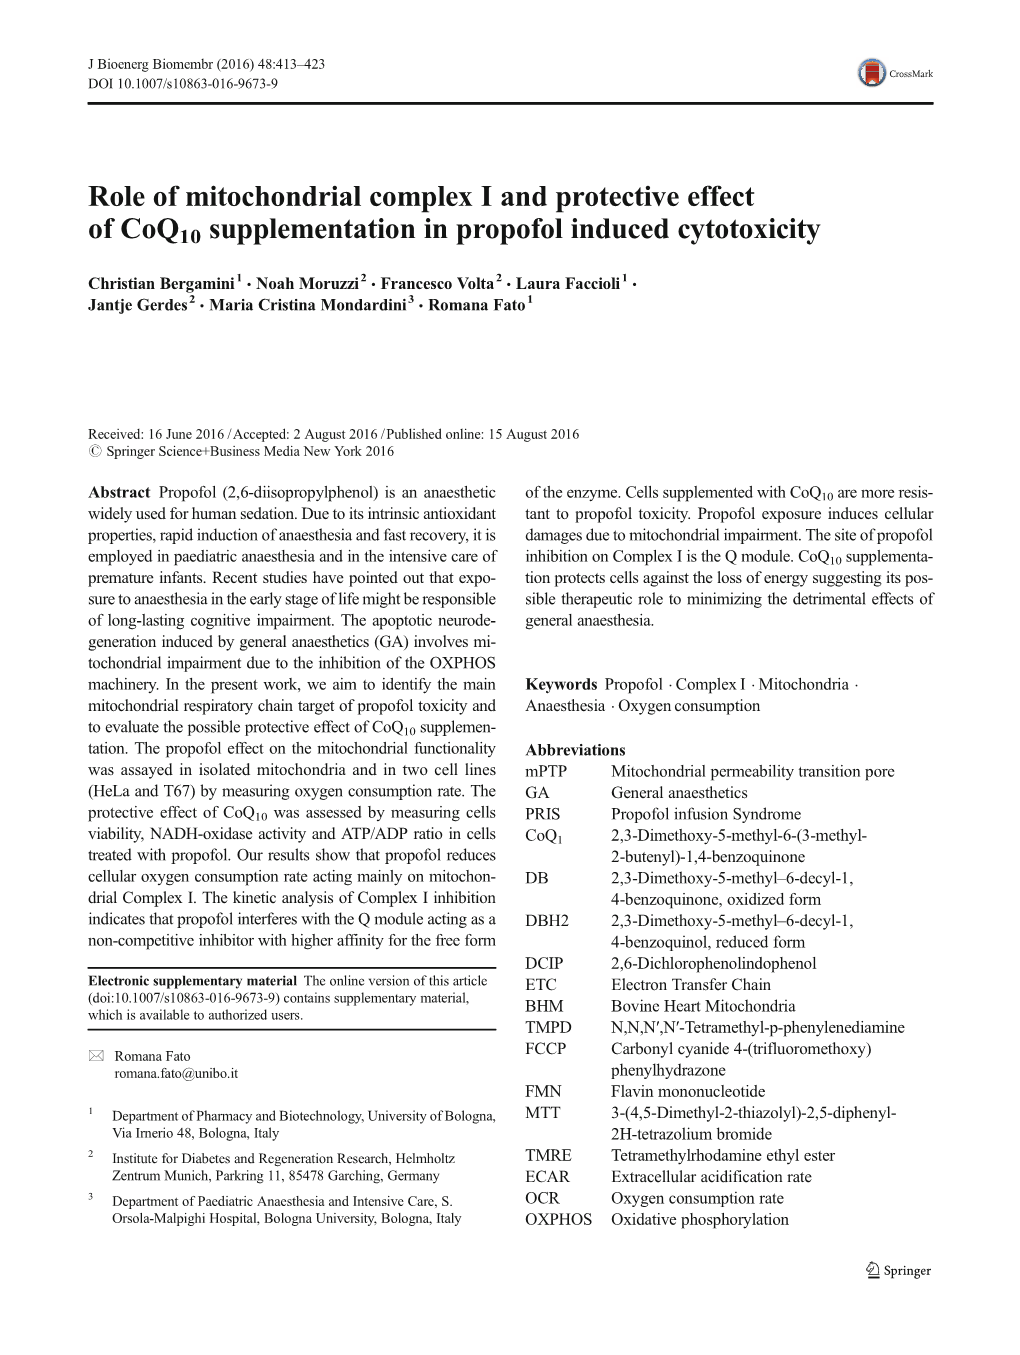 Role of Mitochondrial Complex I and Protective Effect of Coq10 Supplementation in Propofol Induced Cytotoxicity